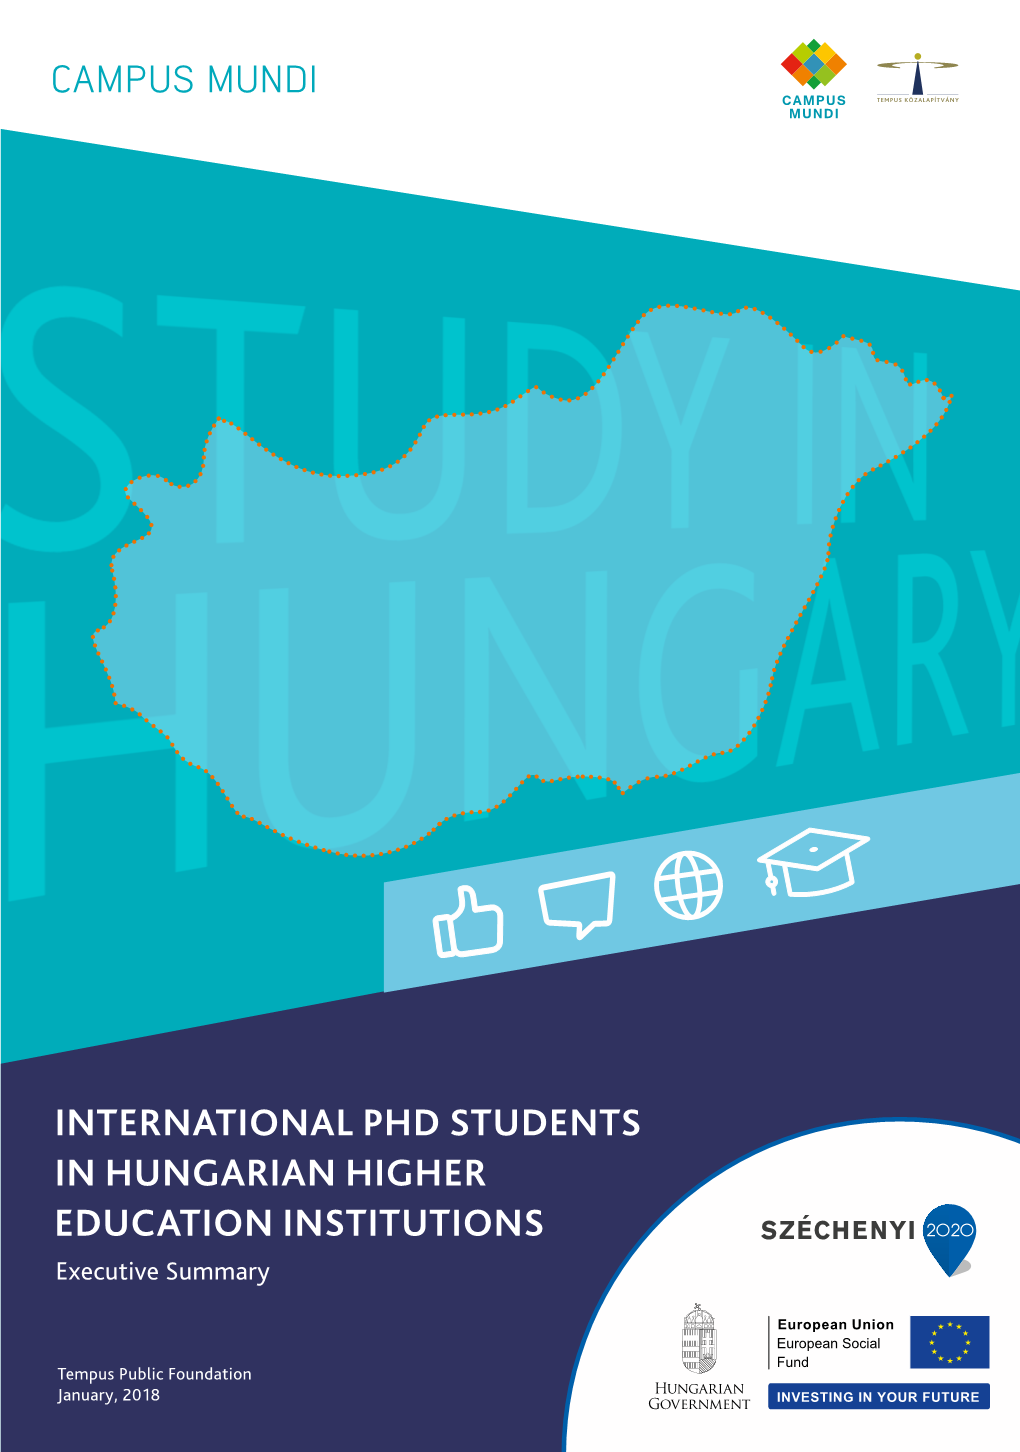 INTERNATIONAL PHD STUDENTS in HUNGARIAN HIGHER EDUCATION INSTITUTIONS Executive Summary